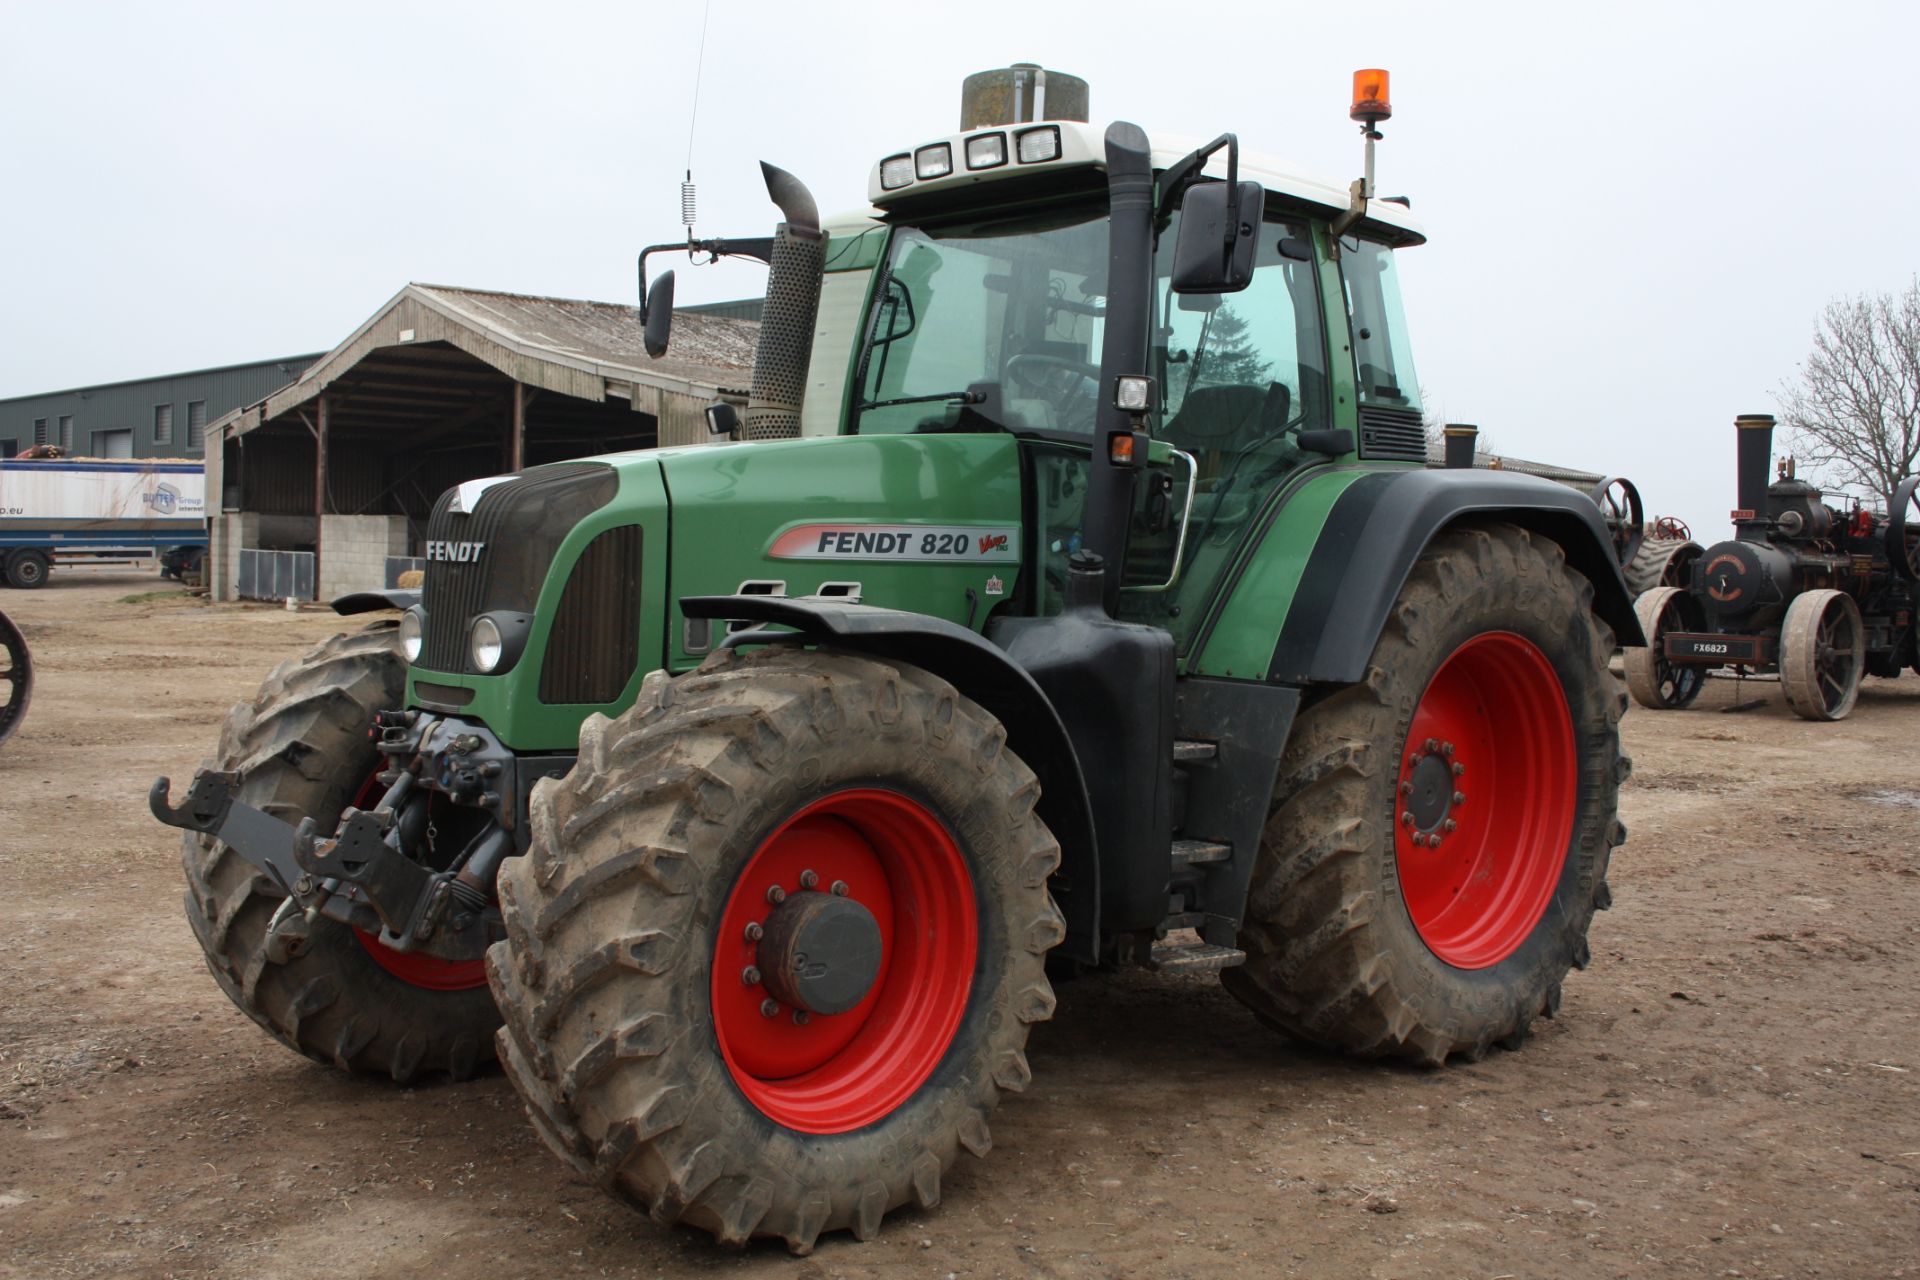 2008 Fendt 820 Vario TMS 4wd Tractor. Location - Driffield, E Yorkshire - Image 5 of 5